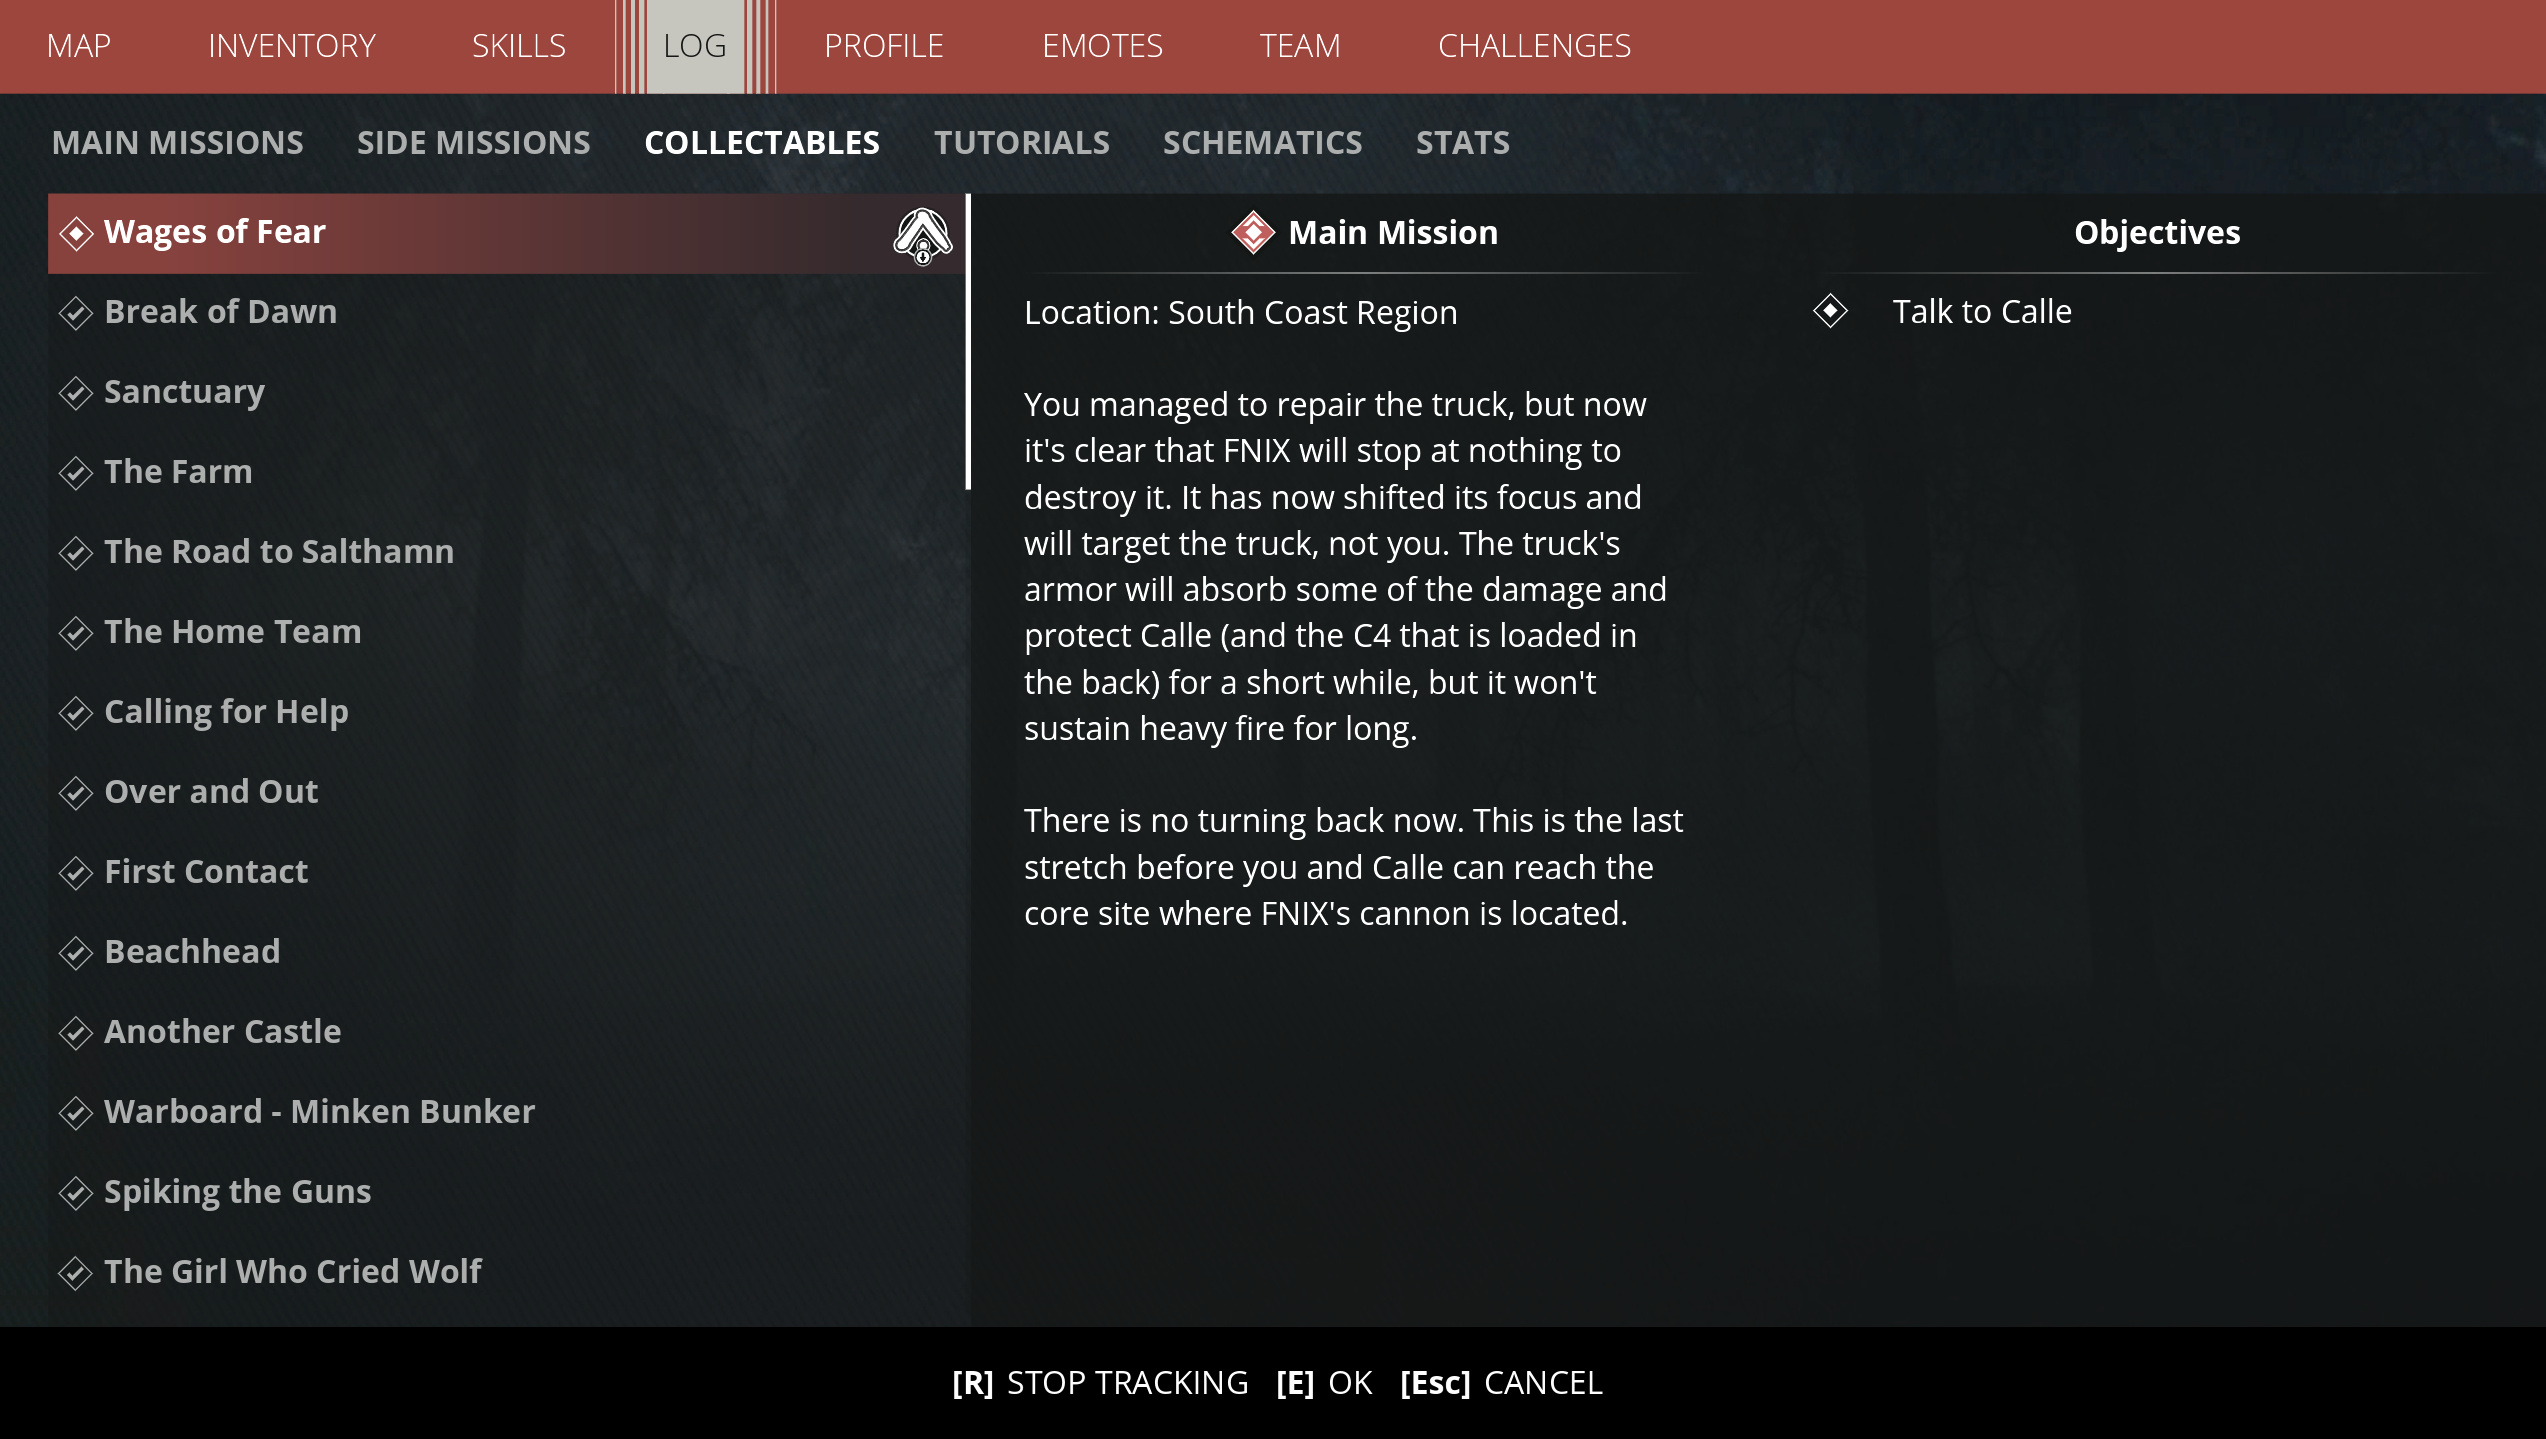 Wages of Fear Mission Issue (No map icon for "Talk To Calle" objective) - Support Reports - Generation Forum